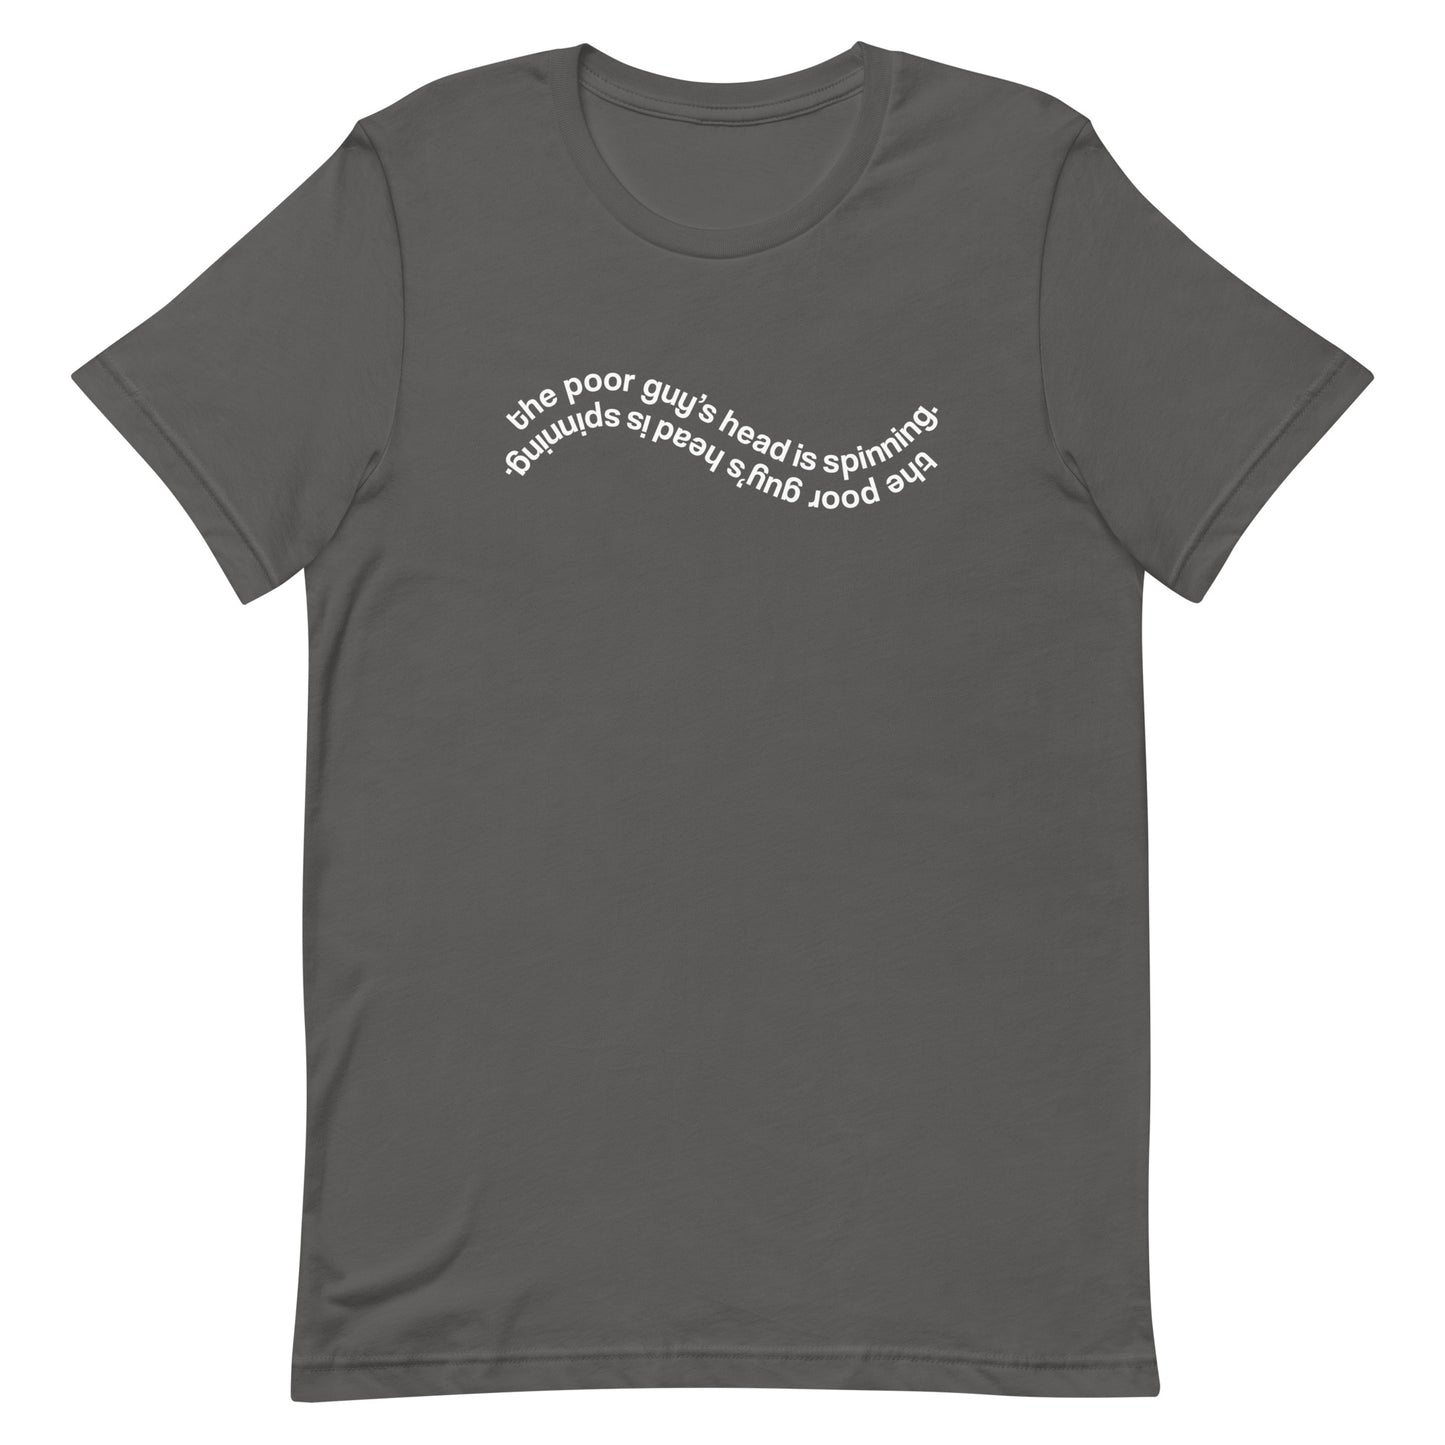 Look It Up T-shirt